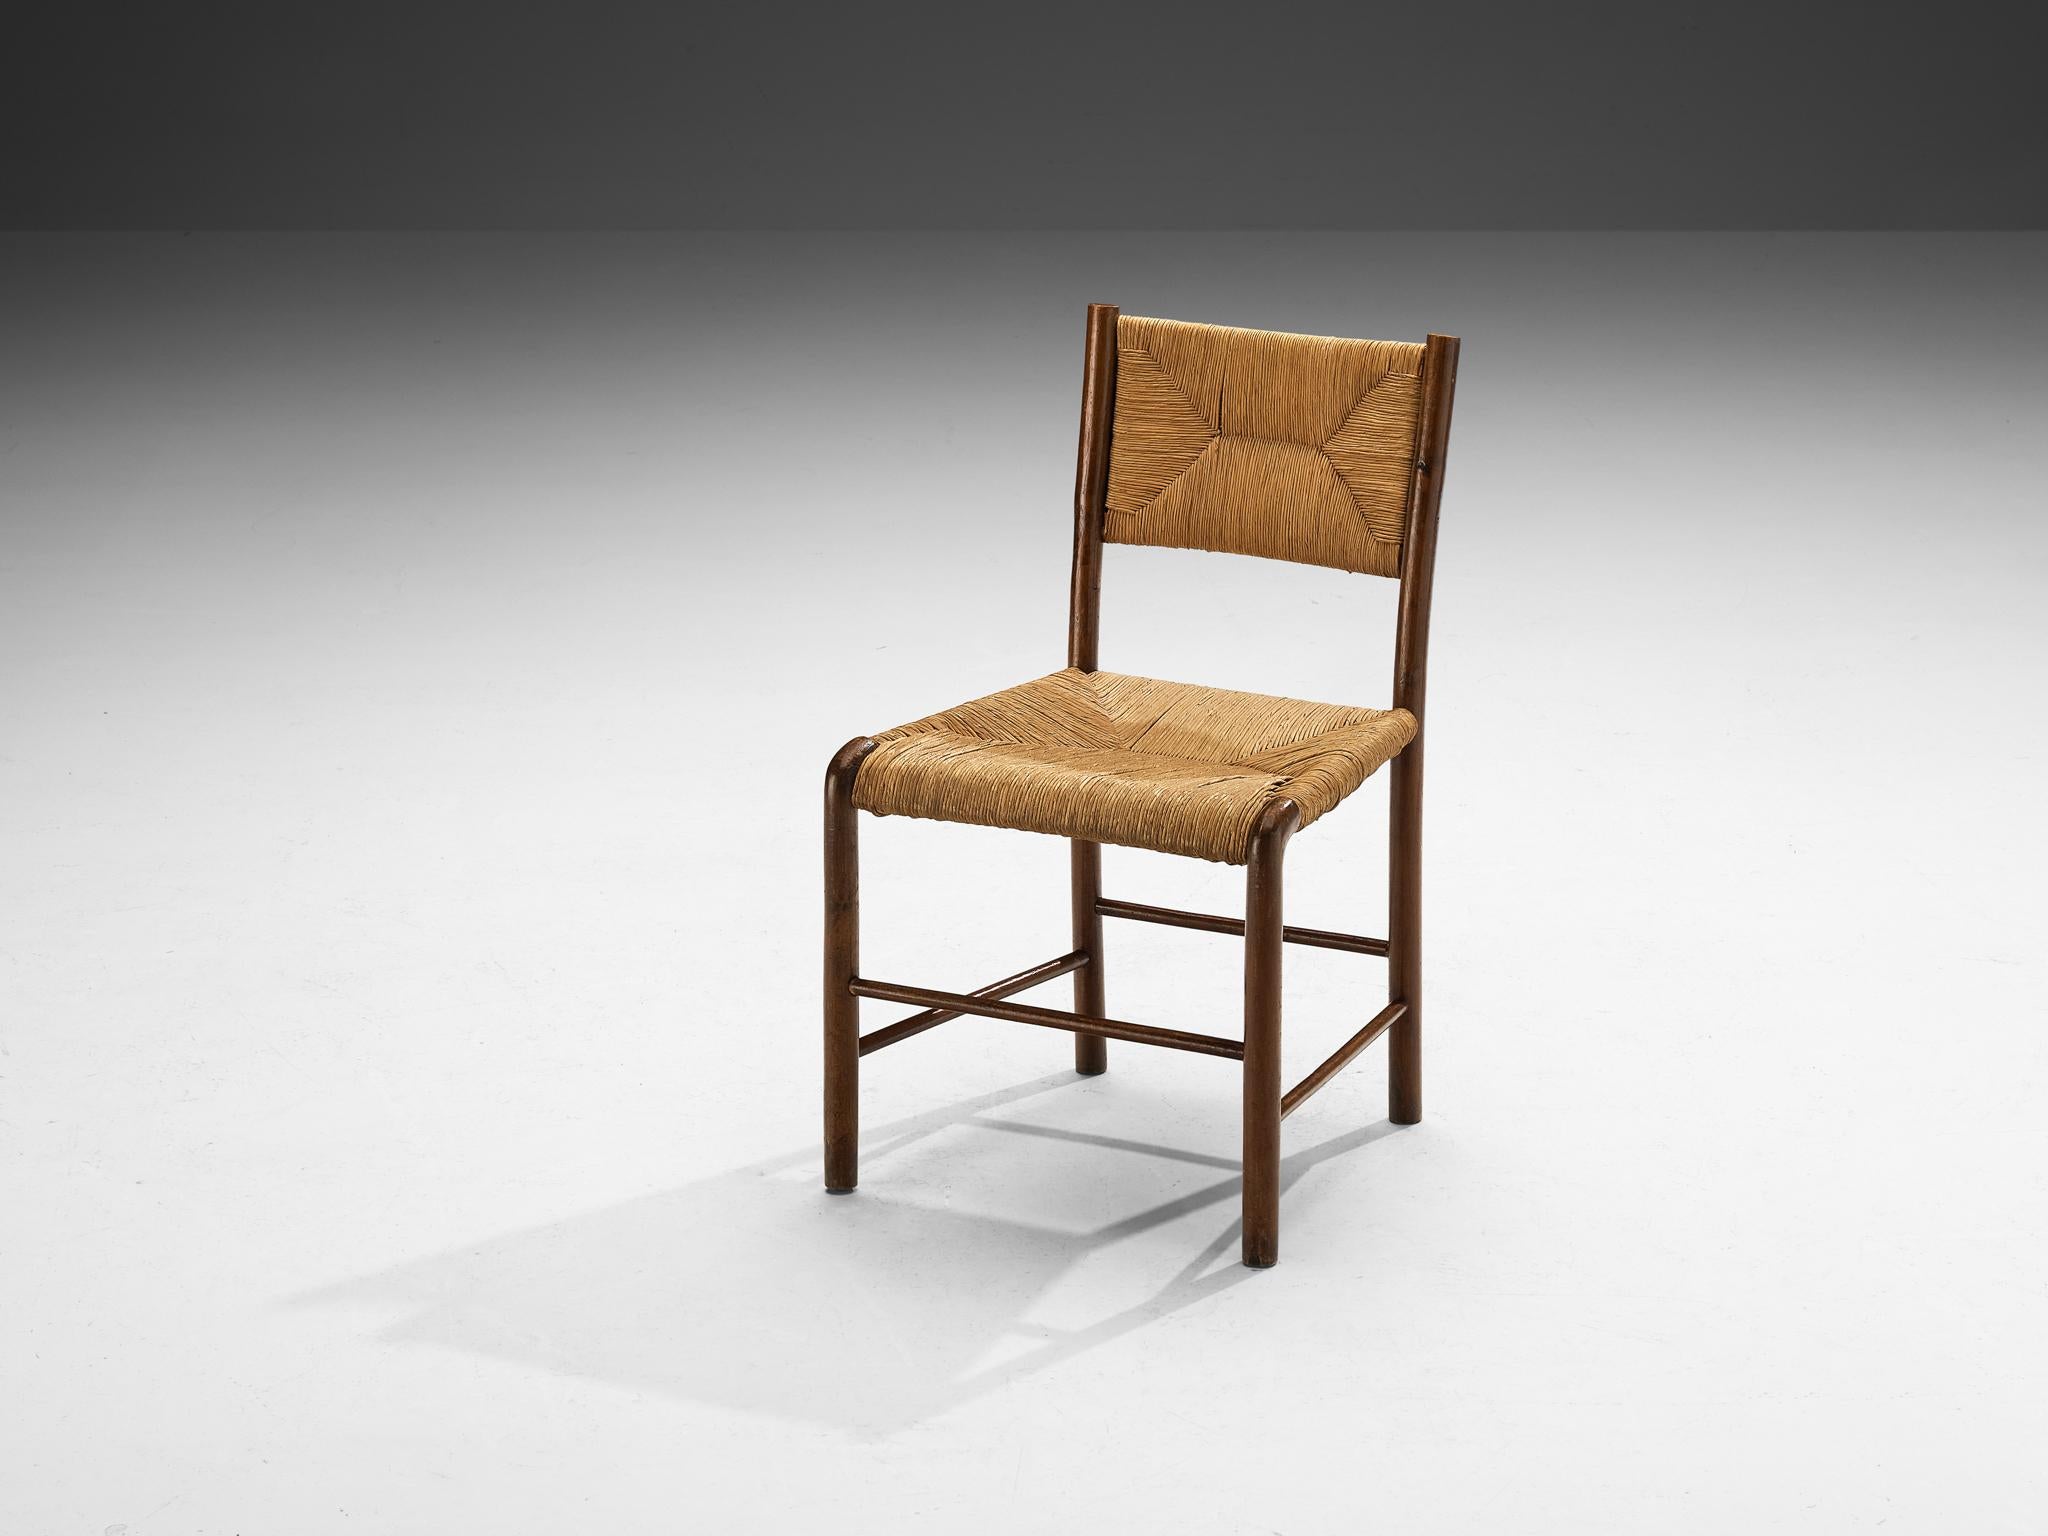 Emanuele Rambaldi for Chiappe, chair, beech, straw, Chiavari, Italy, design 1933, production afterwards

Italian painter and furniture designer Emanuele Rambaldi (1903-1968) created this charming chair. The present model was first published in Domus